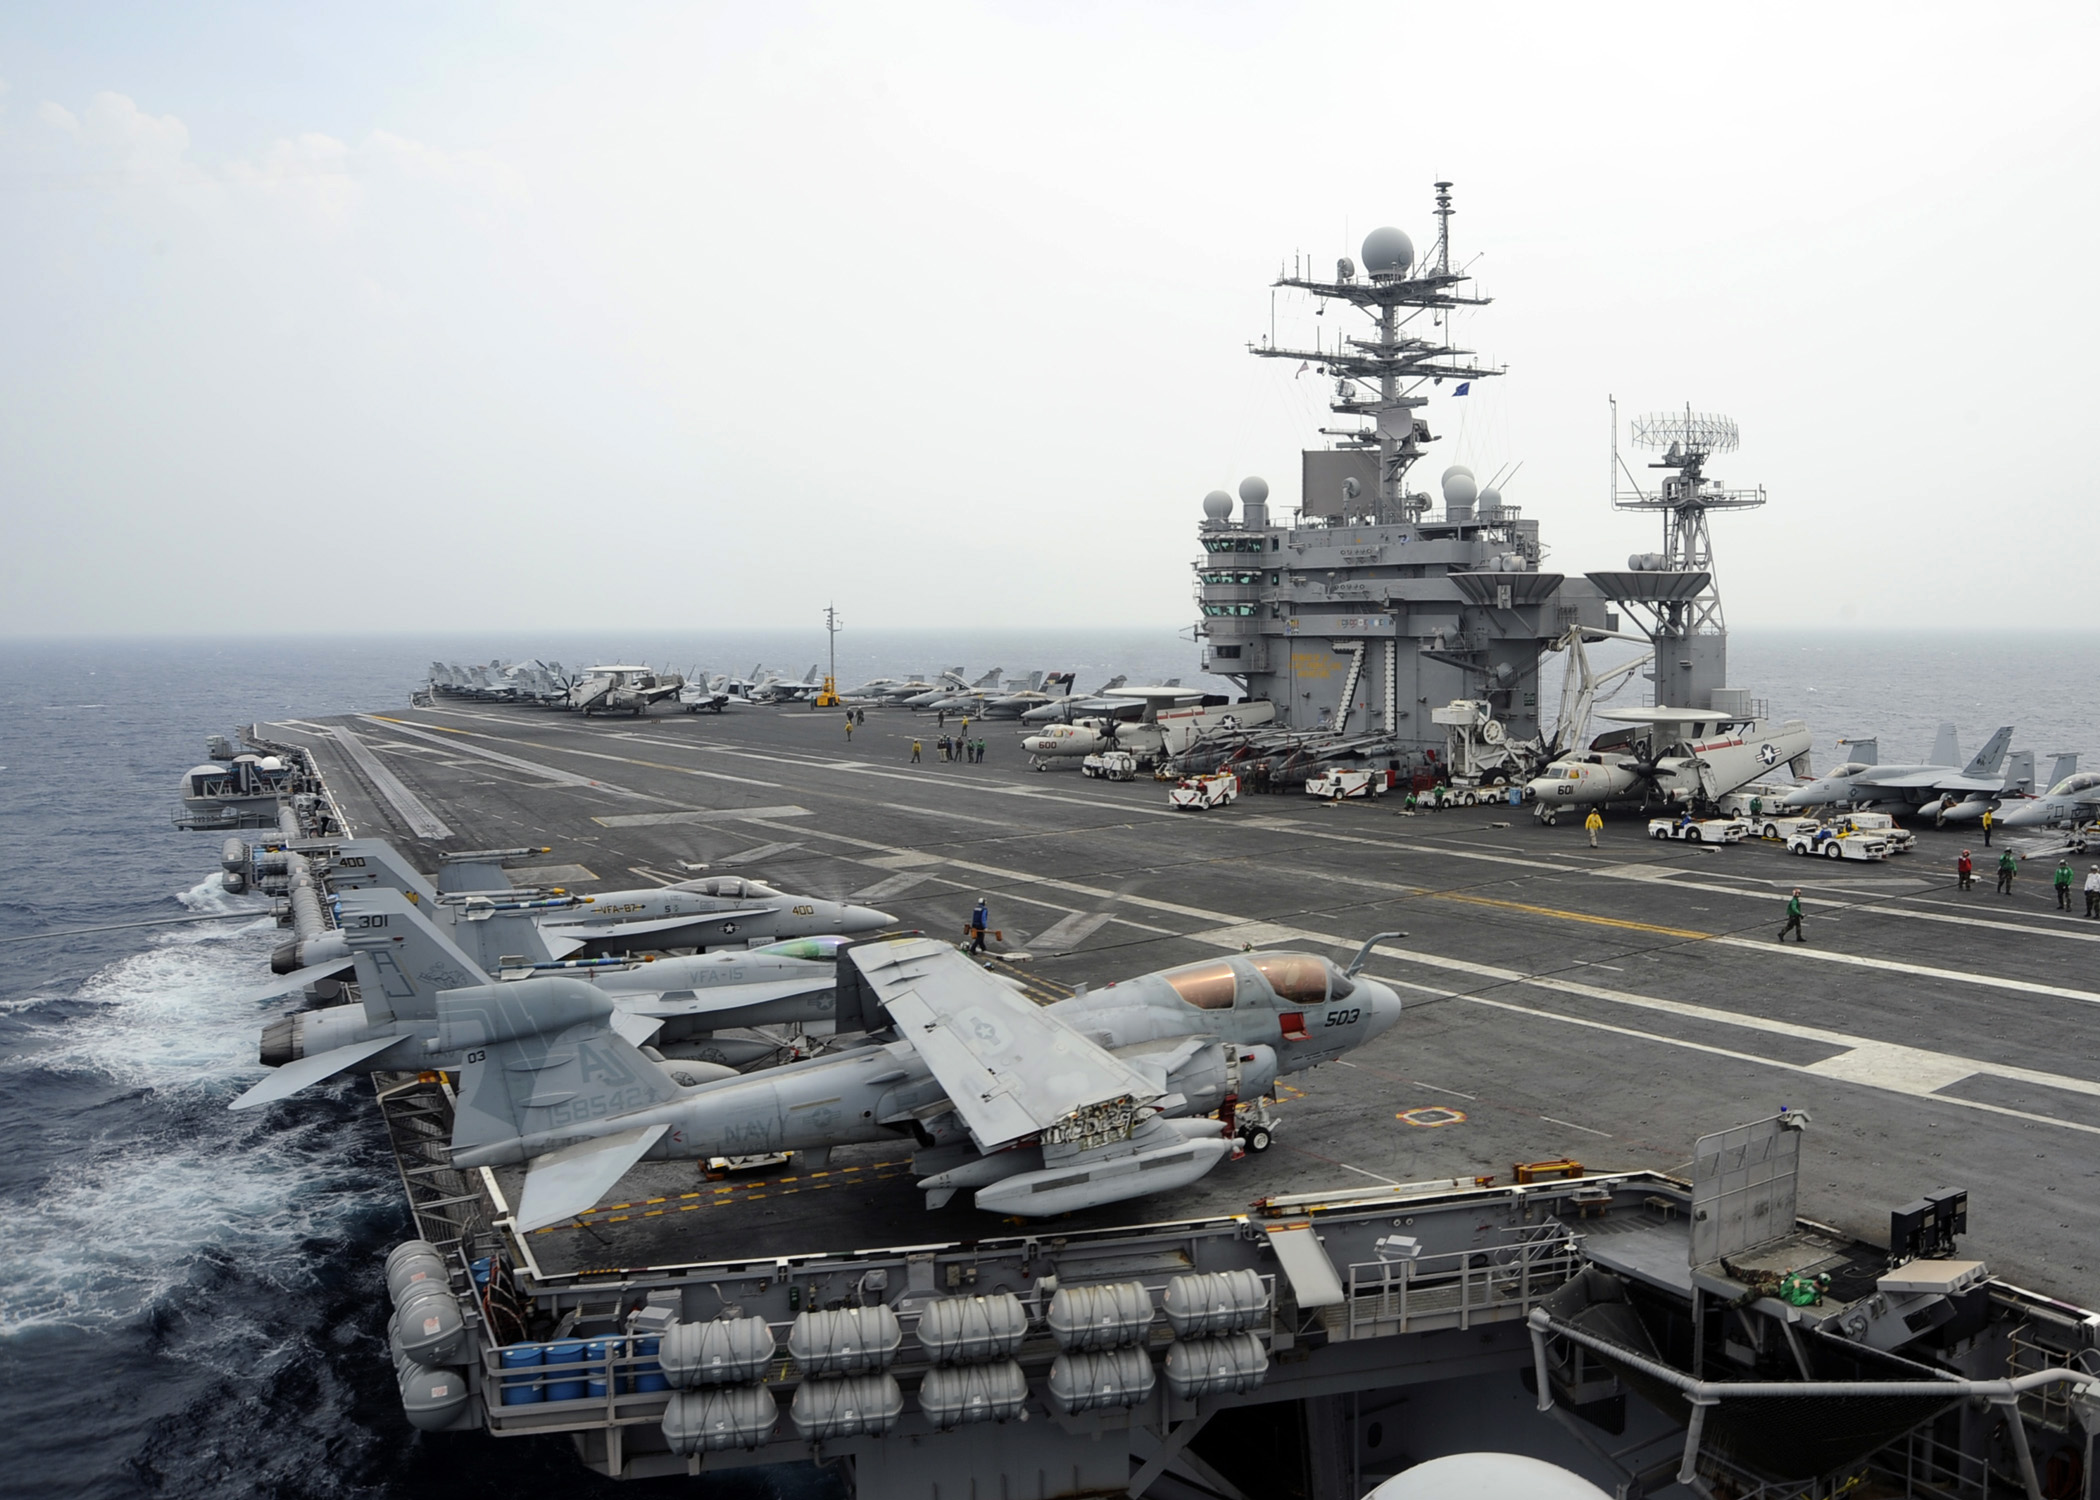 US_Navy_080723-N-7571S-005_The_aircraft_carrier_USS_Theodore_Roosevelt_%28CVN_71%29_navigates_in_the_Atlantic_Ocean_before_a_French_F-2_Rafale_M%2C_E-2C_Hawkeye_and_American_F-A-18_Super_Hornet_aircraft_fly-by_over_the_deck.jpg